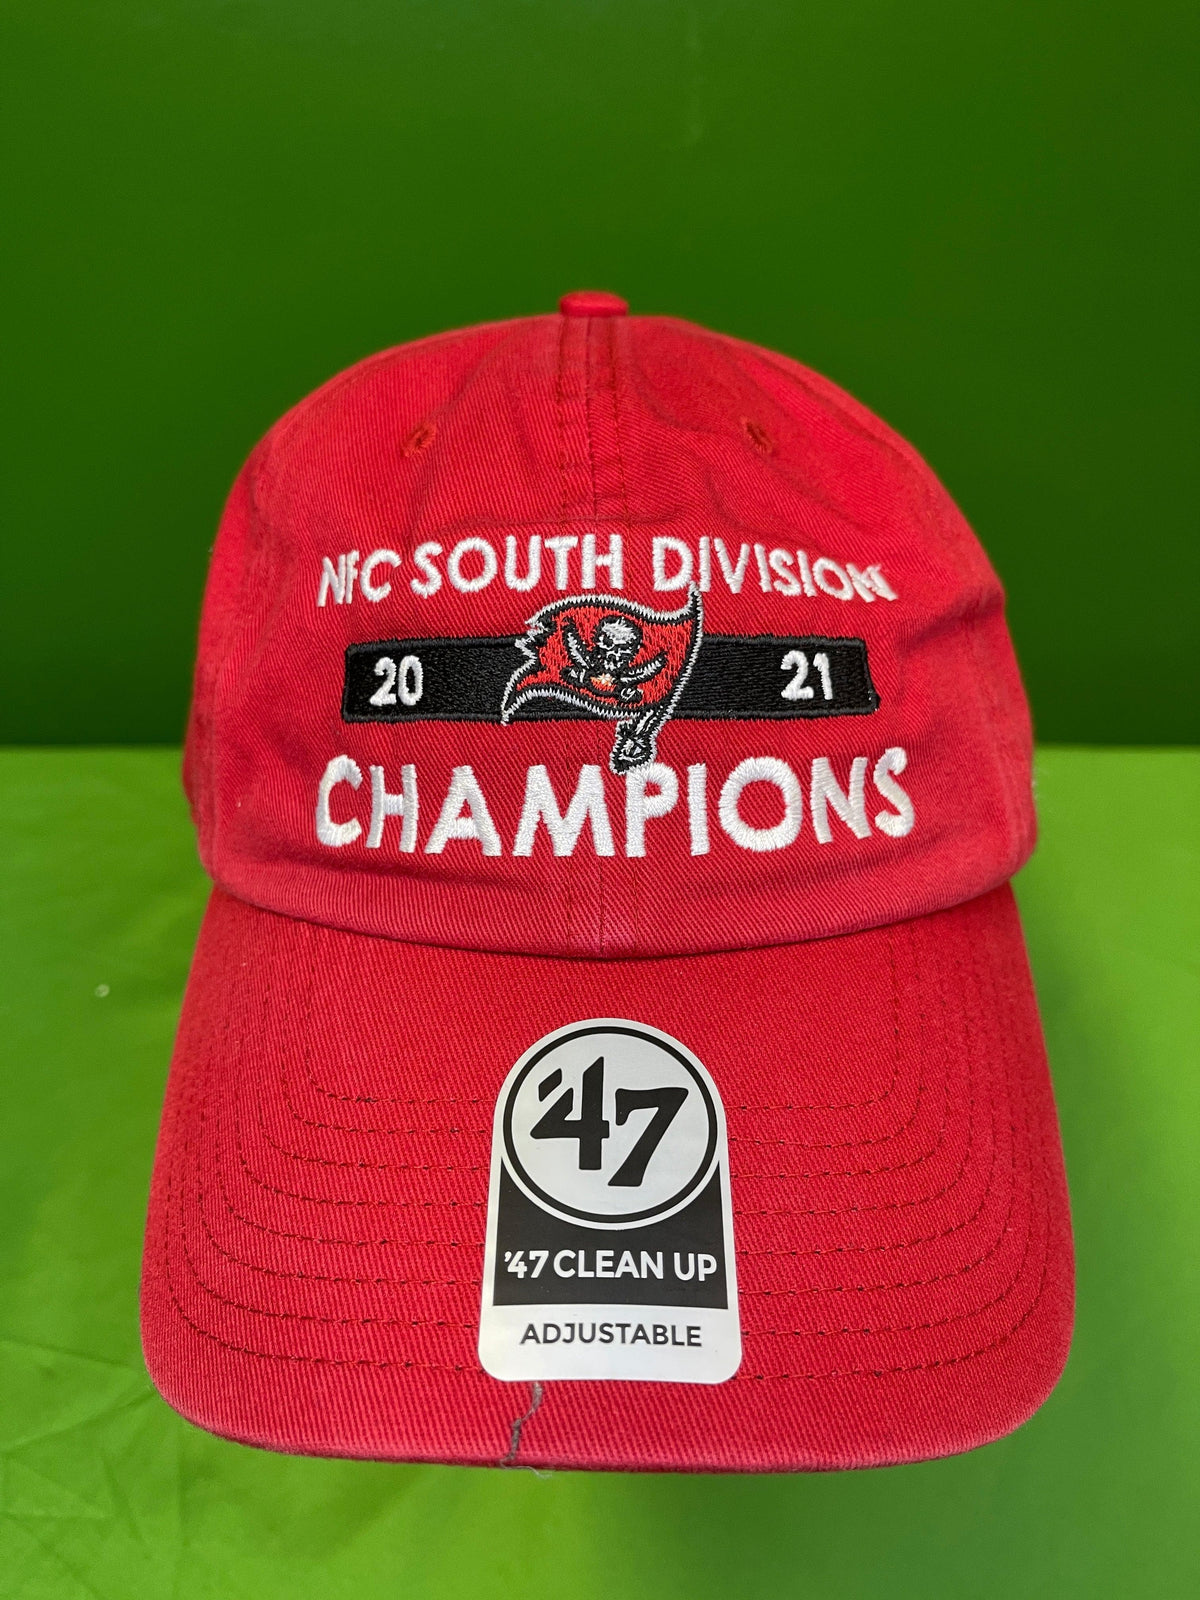 NFL Tampa Bay Buccaneers '47 Cleanup NFC South Champions Strapback Hat Cap OSFA NWT